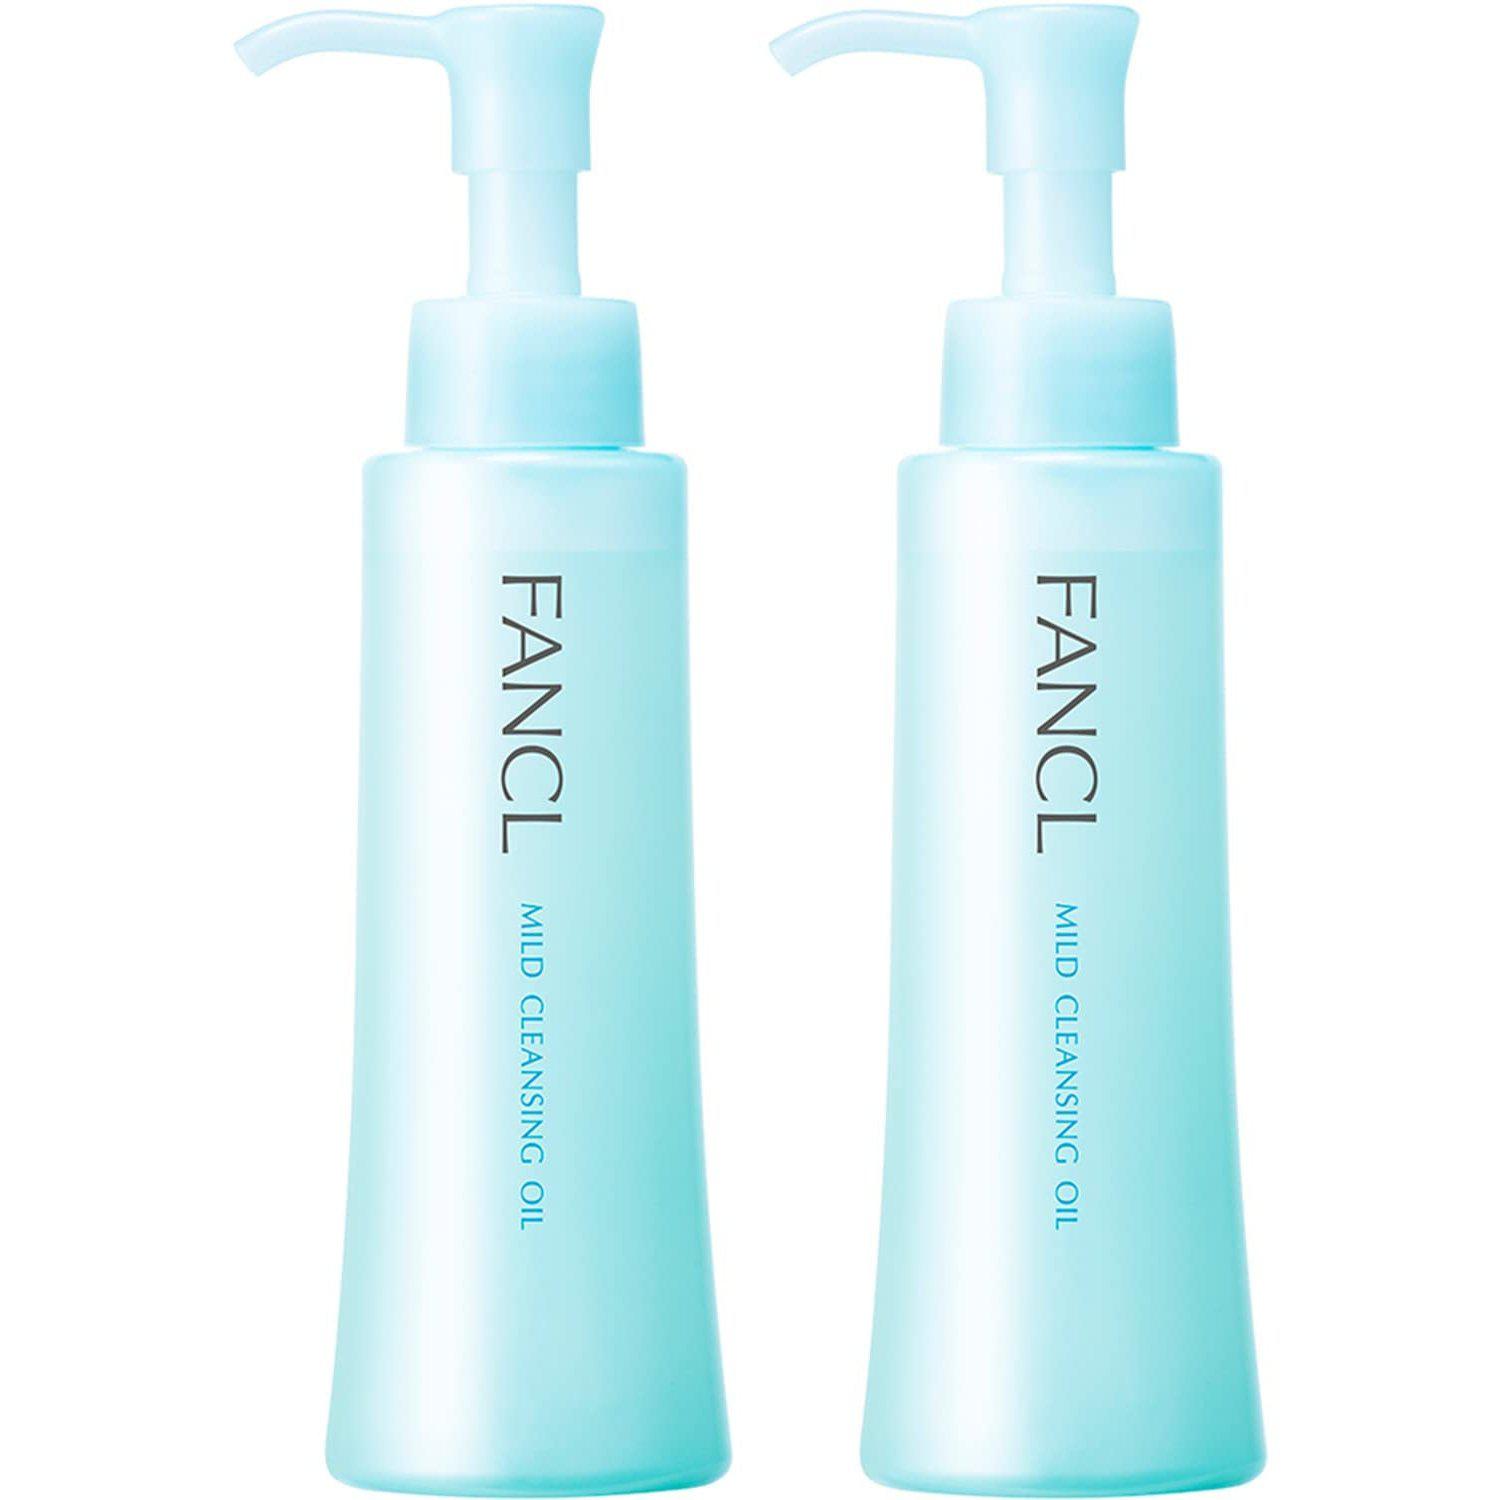 FANCL Mild Cleansing Oil (Pack of 2)